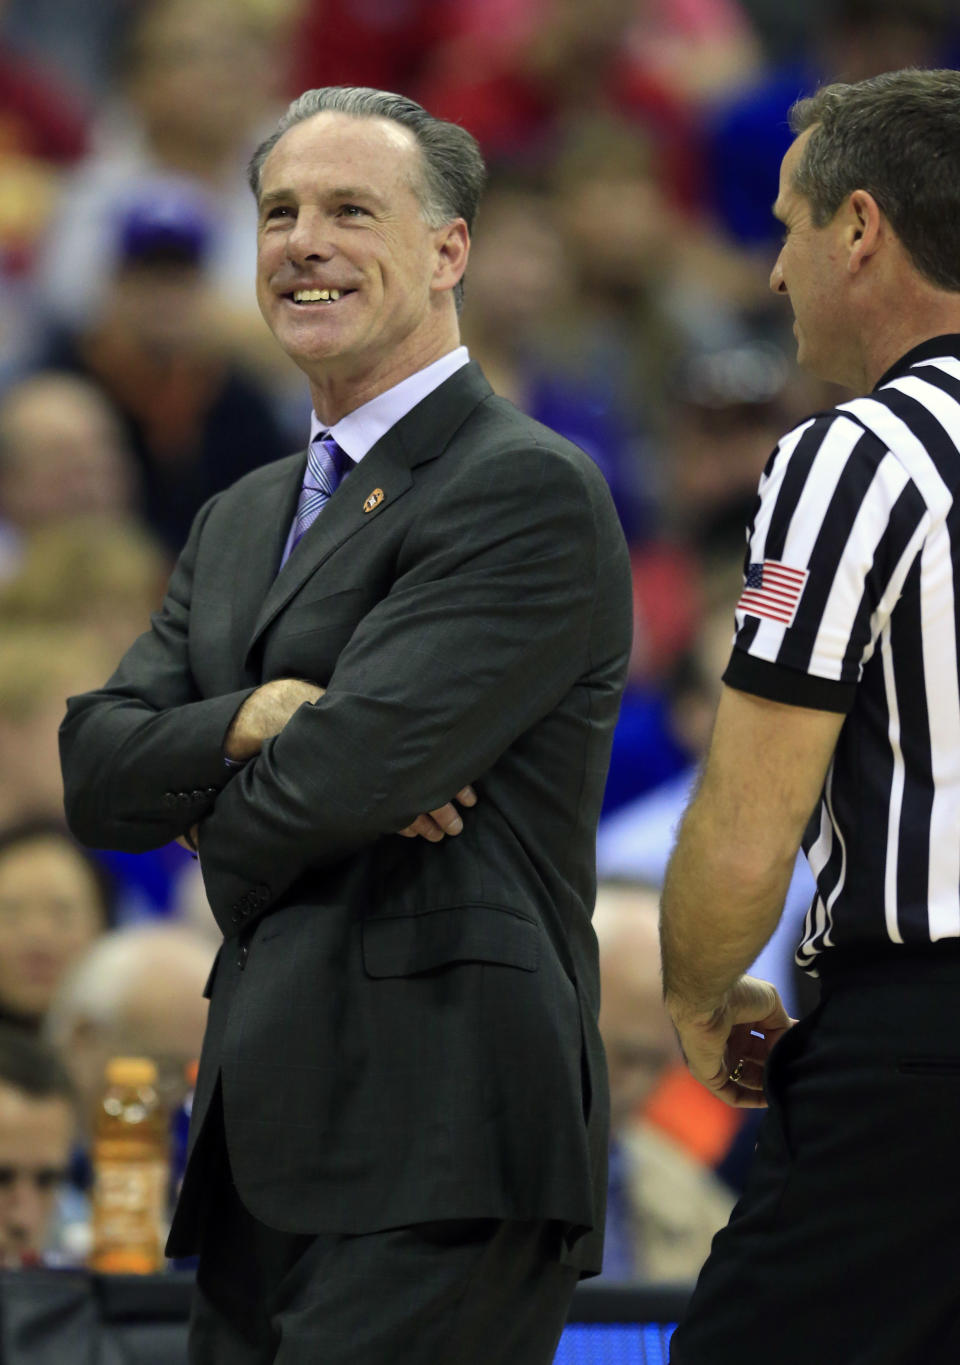 TCU head coach Jamie Dixon smiles after a call during first half of an NCAA college basketball game against Kansas in the quarterfinal round of the Big 12 tournament in Kansas City, Mo., Thursday, March 9, 2017. (AP Photo/Orlin Wagner)